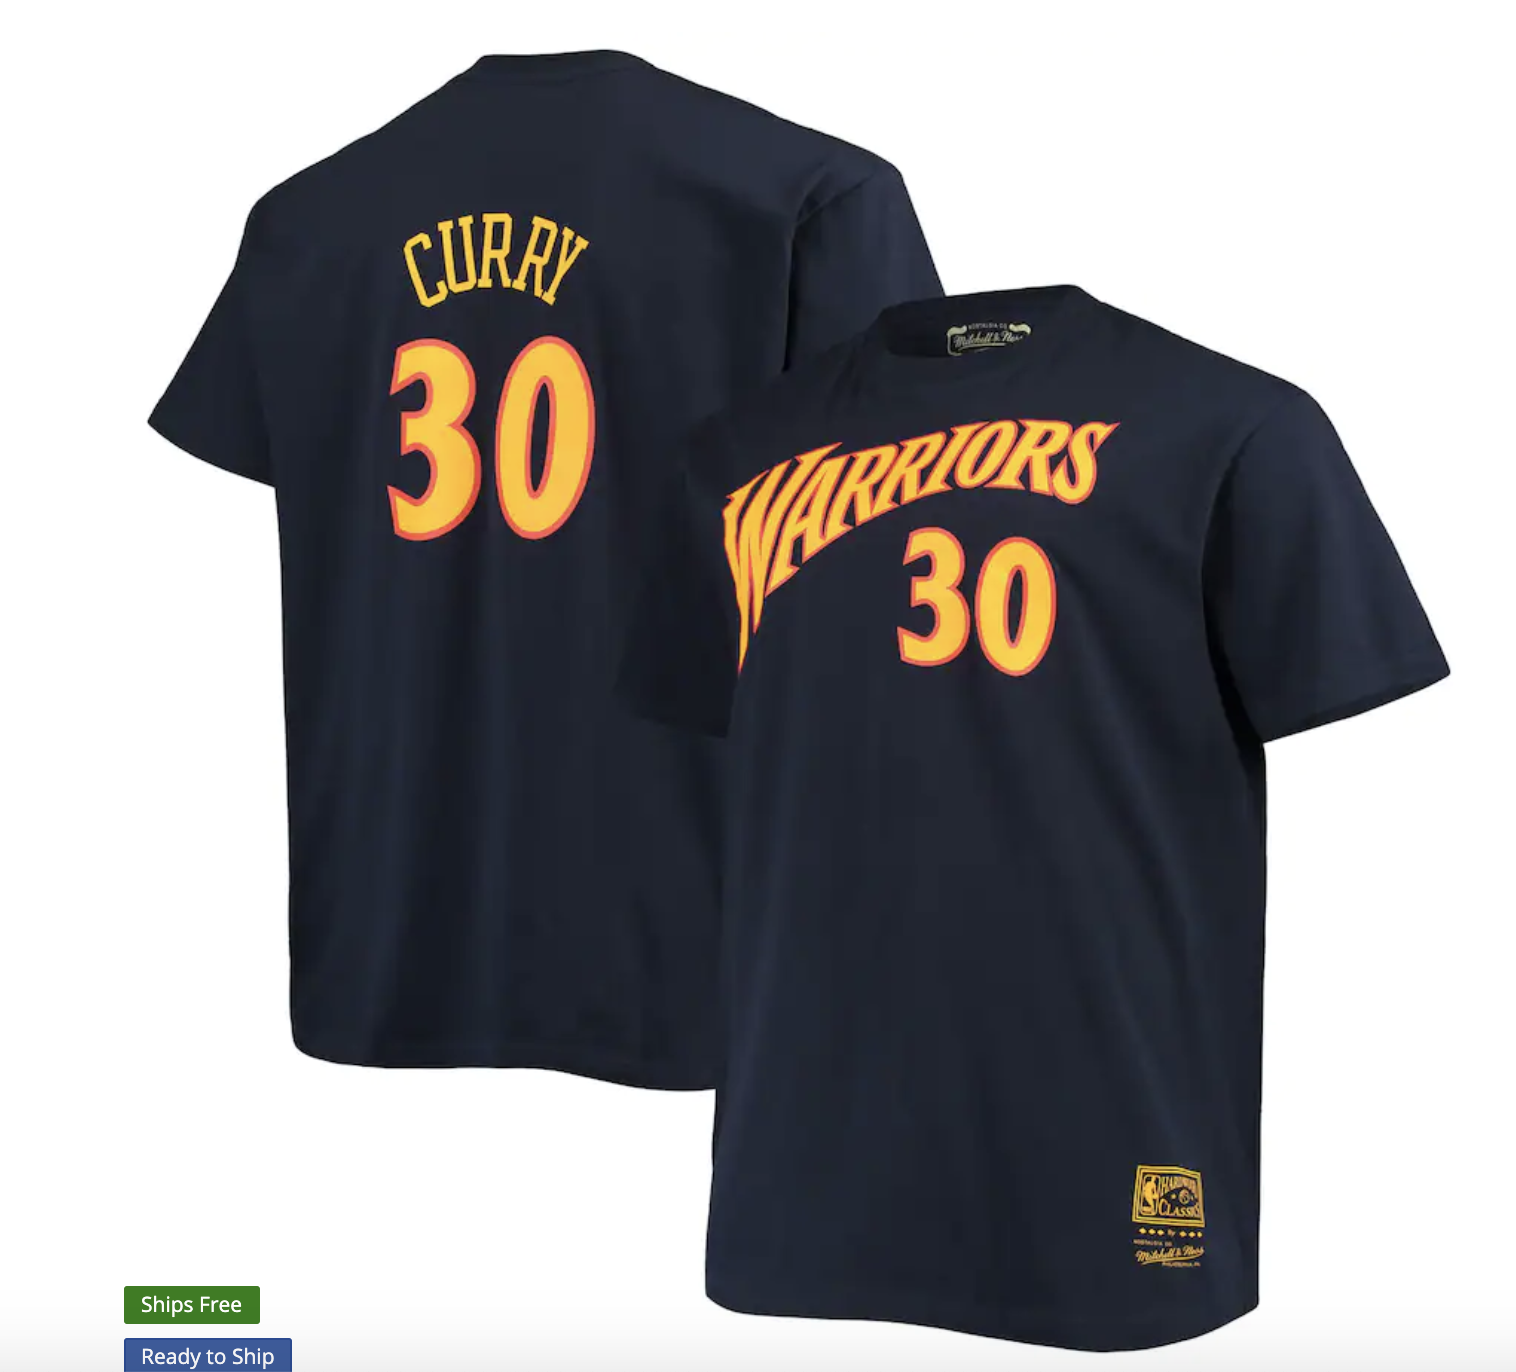 Oakland sports fans are peeved about Golden State Warriors' new jerseys